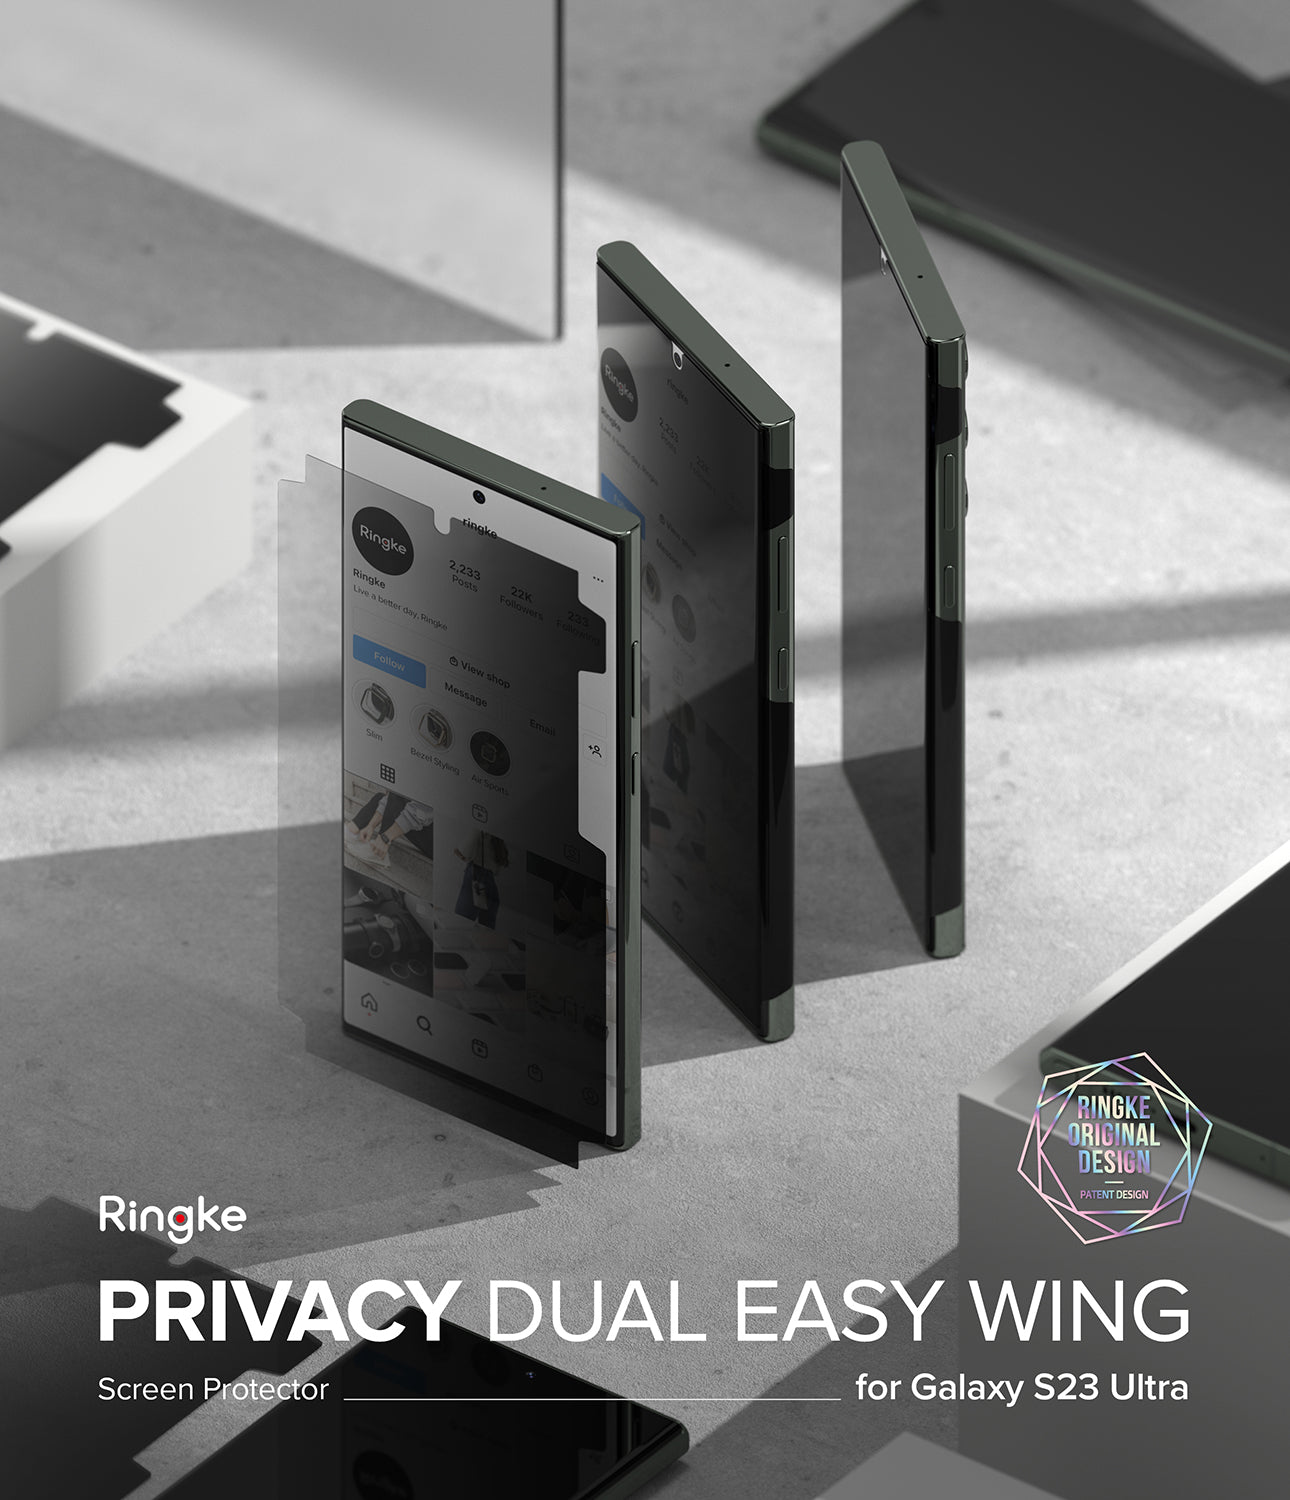 Galaxy S23 Ultra Screen Protector  Ringke Privacy Dual Easy Film Wing –  Ringke Official Store